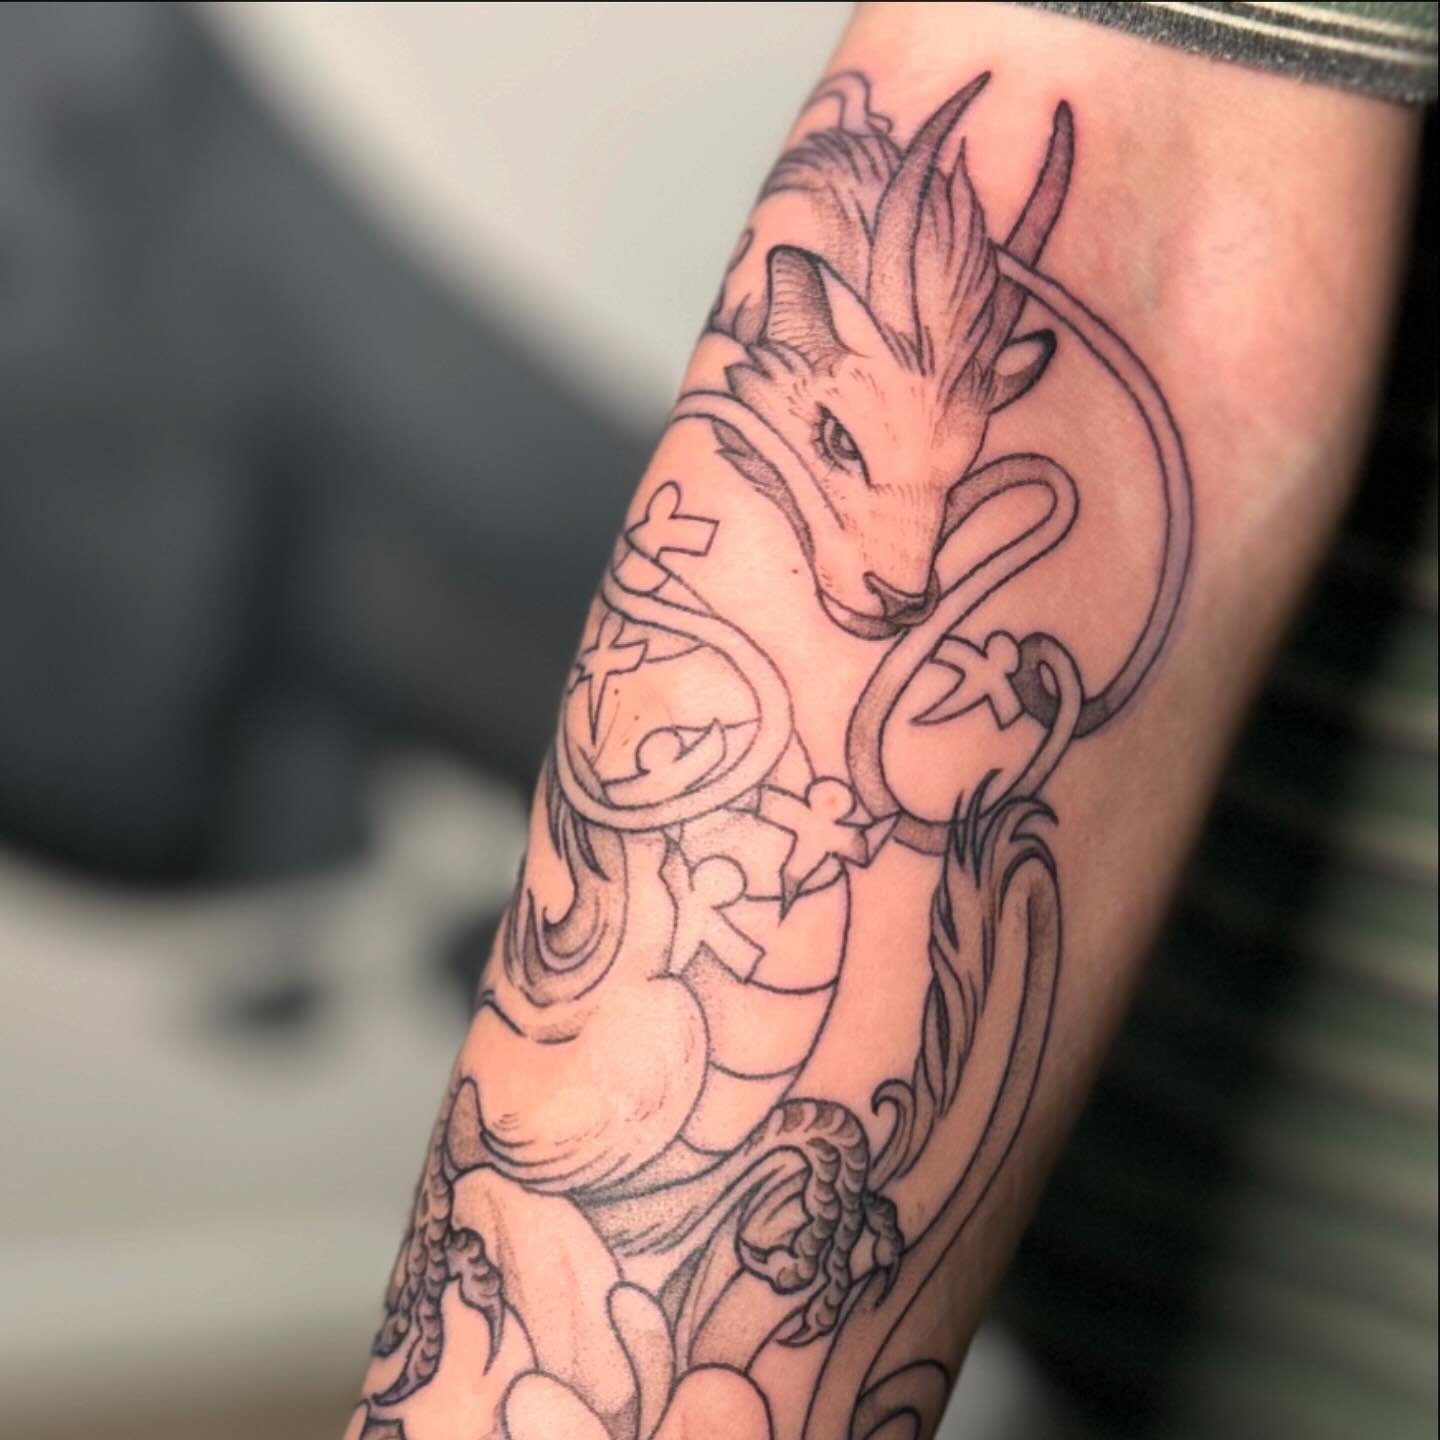 Haku forearm piece 🤍🤍🤍 thanks so much for the continued trust for this custom 🤩 

Spirited away themed projects are something I&rsquo;m always down for so hit me up at @stonegardentattoos 

#spiritedawaytattoo #animetattoo #hakutattoo #dragontatt